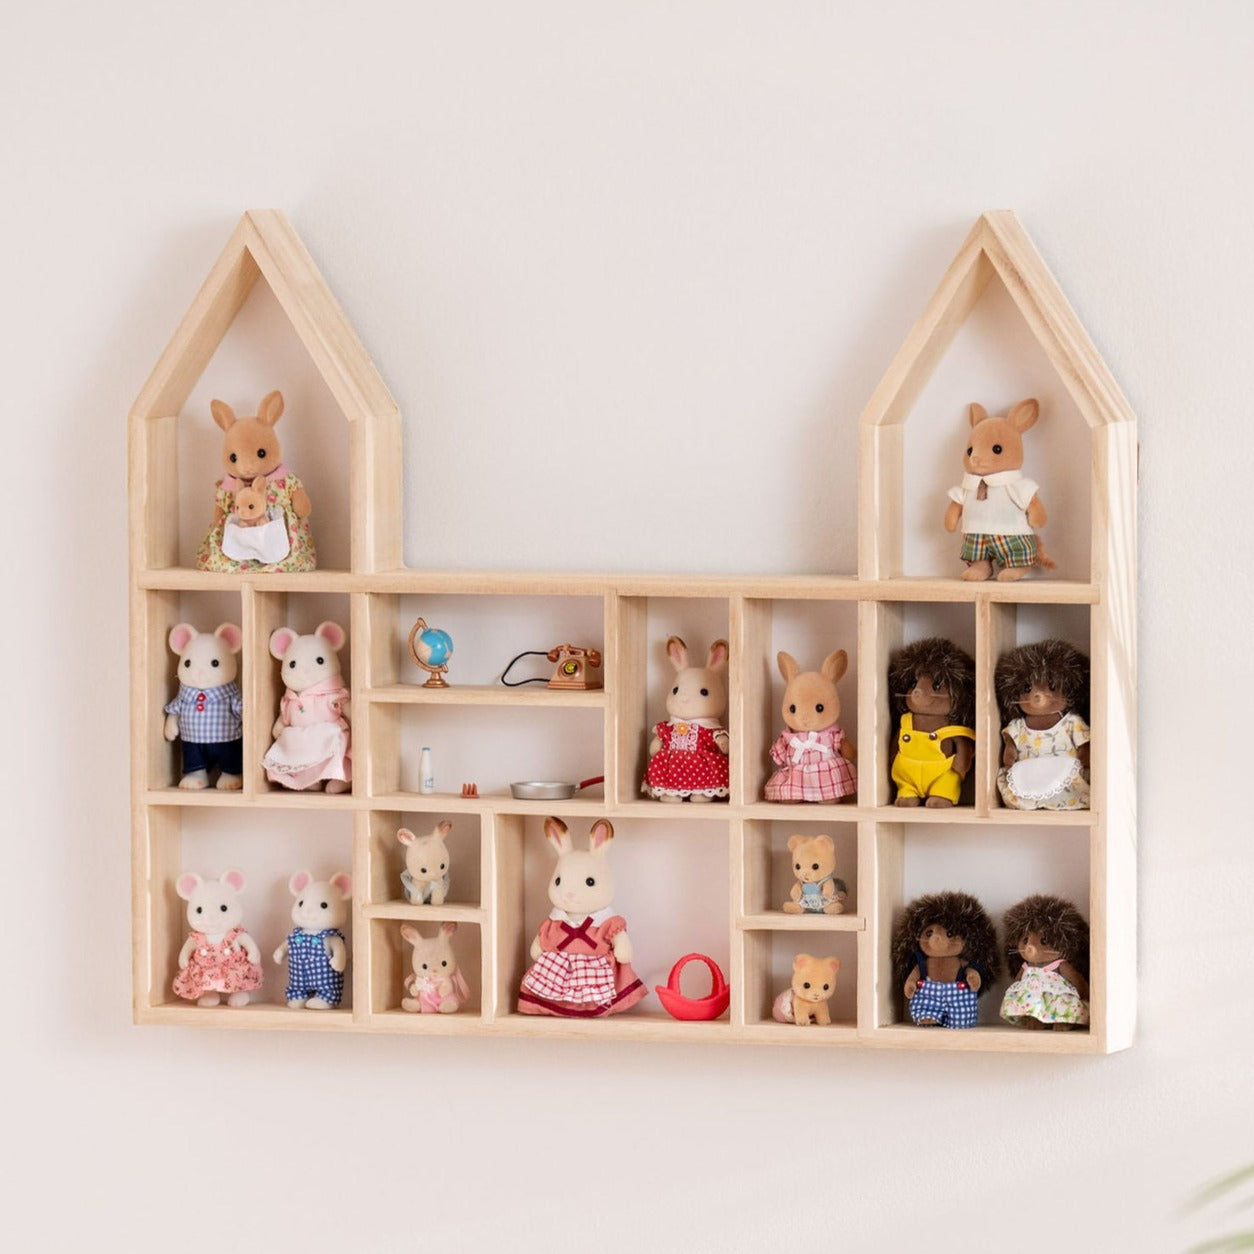 A castle-shaped wooden toy display shelf with Calico Critters display hung on the wall